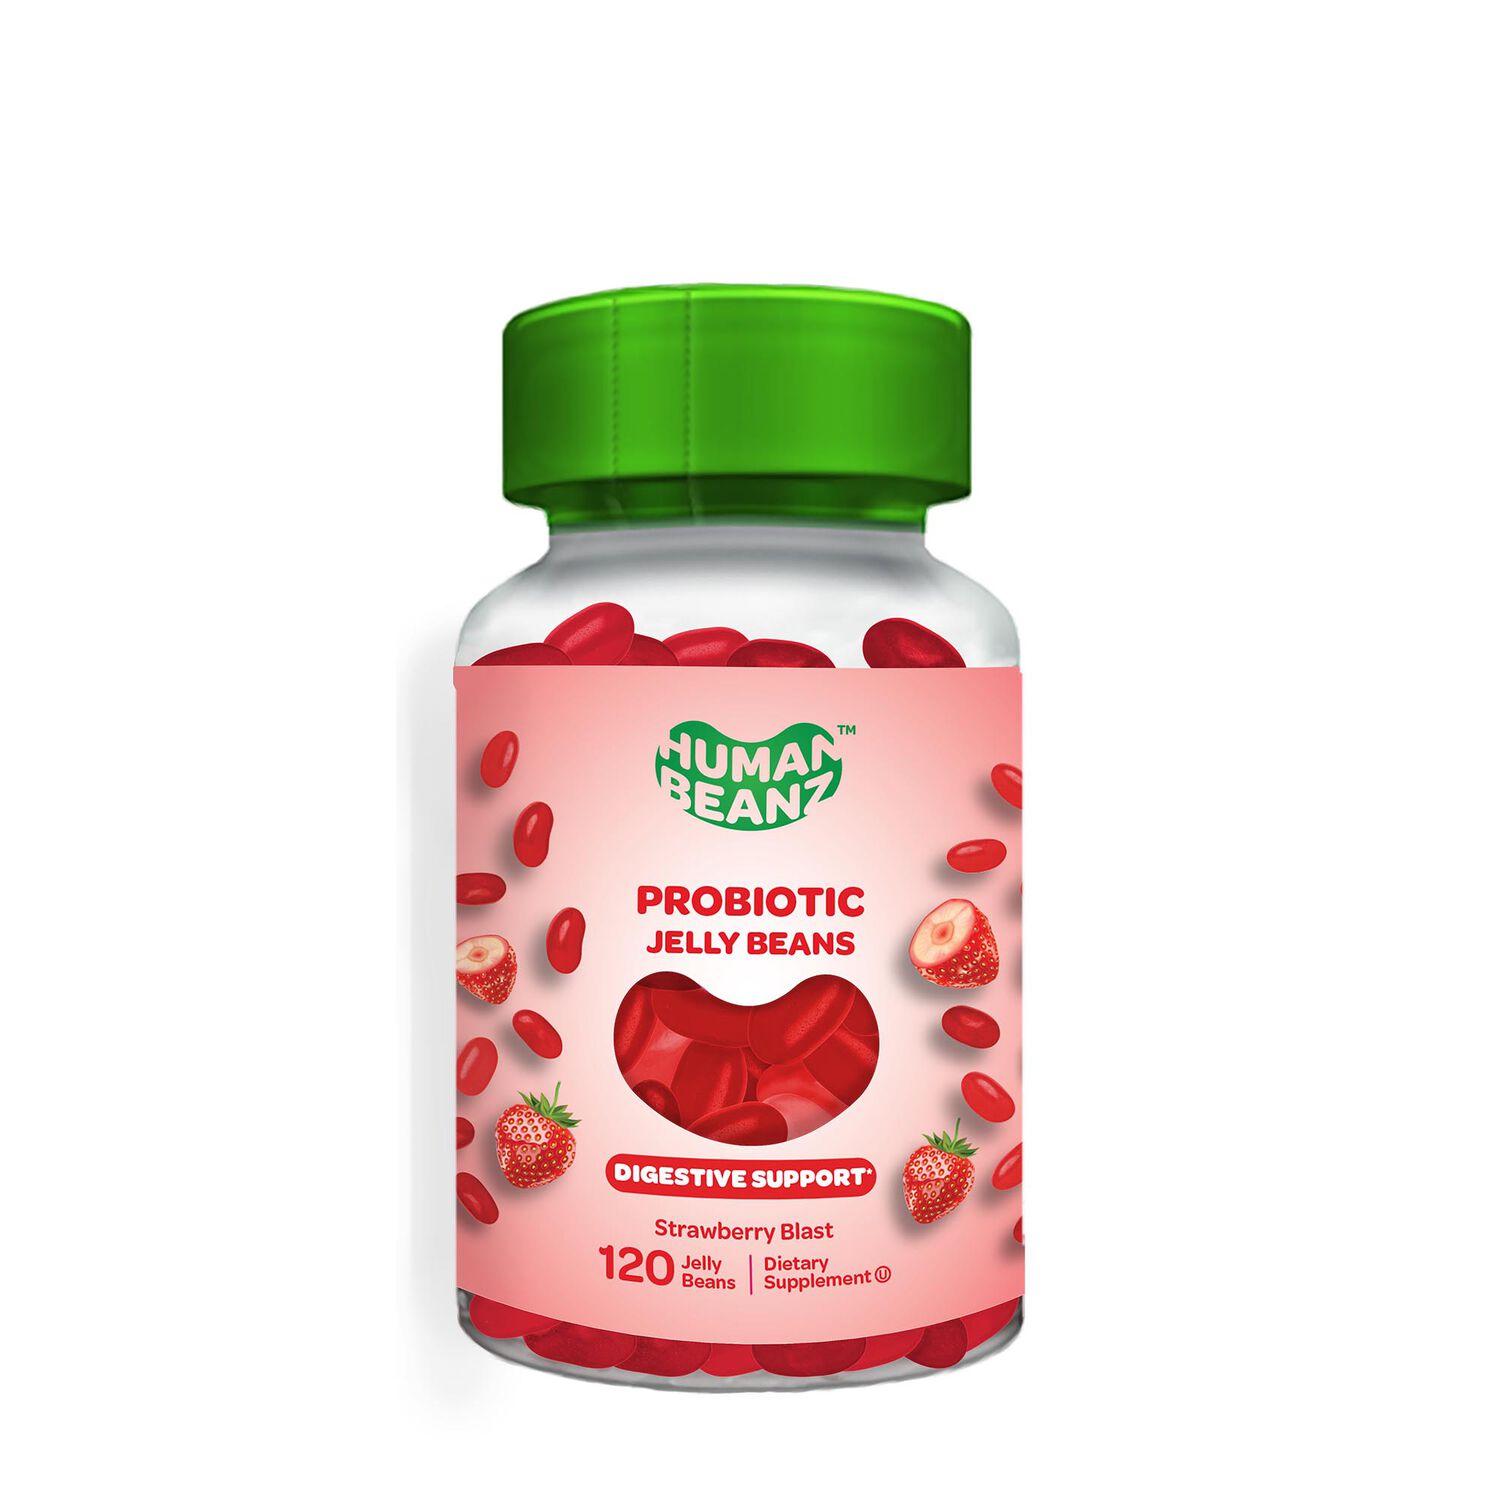 Probiotic Jelly Beans - Strawberry Blast - 120 Jelly Beans &#40;30 Servings&#41;  | GNC